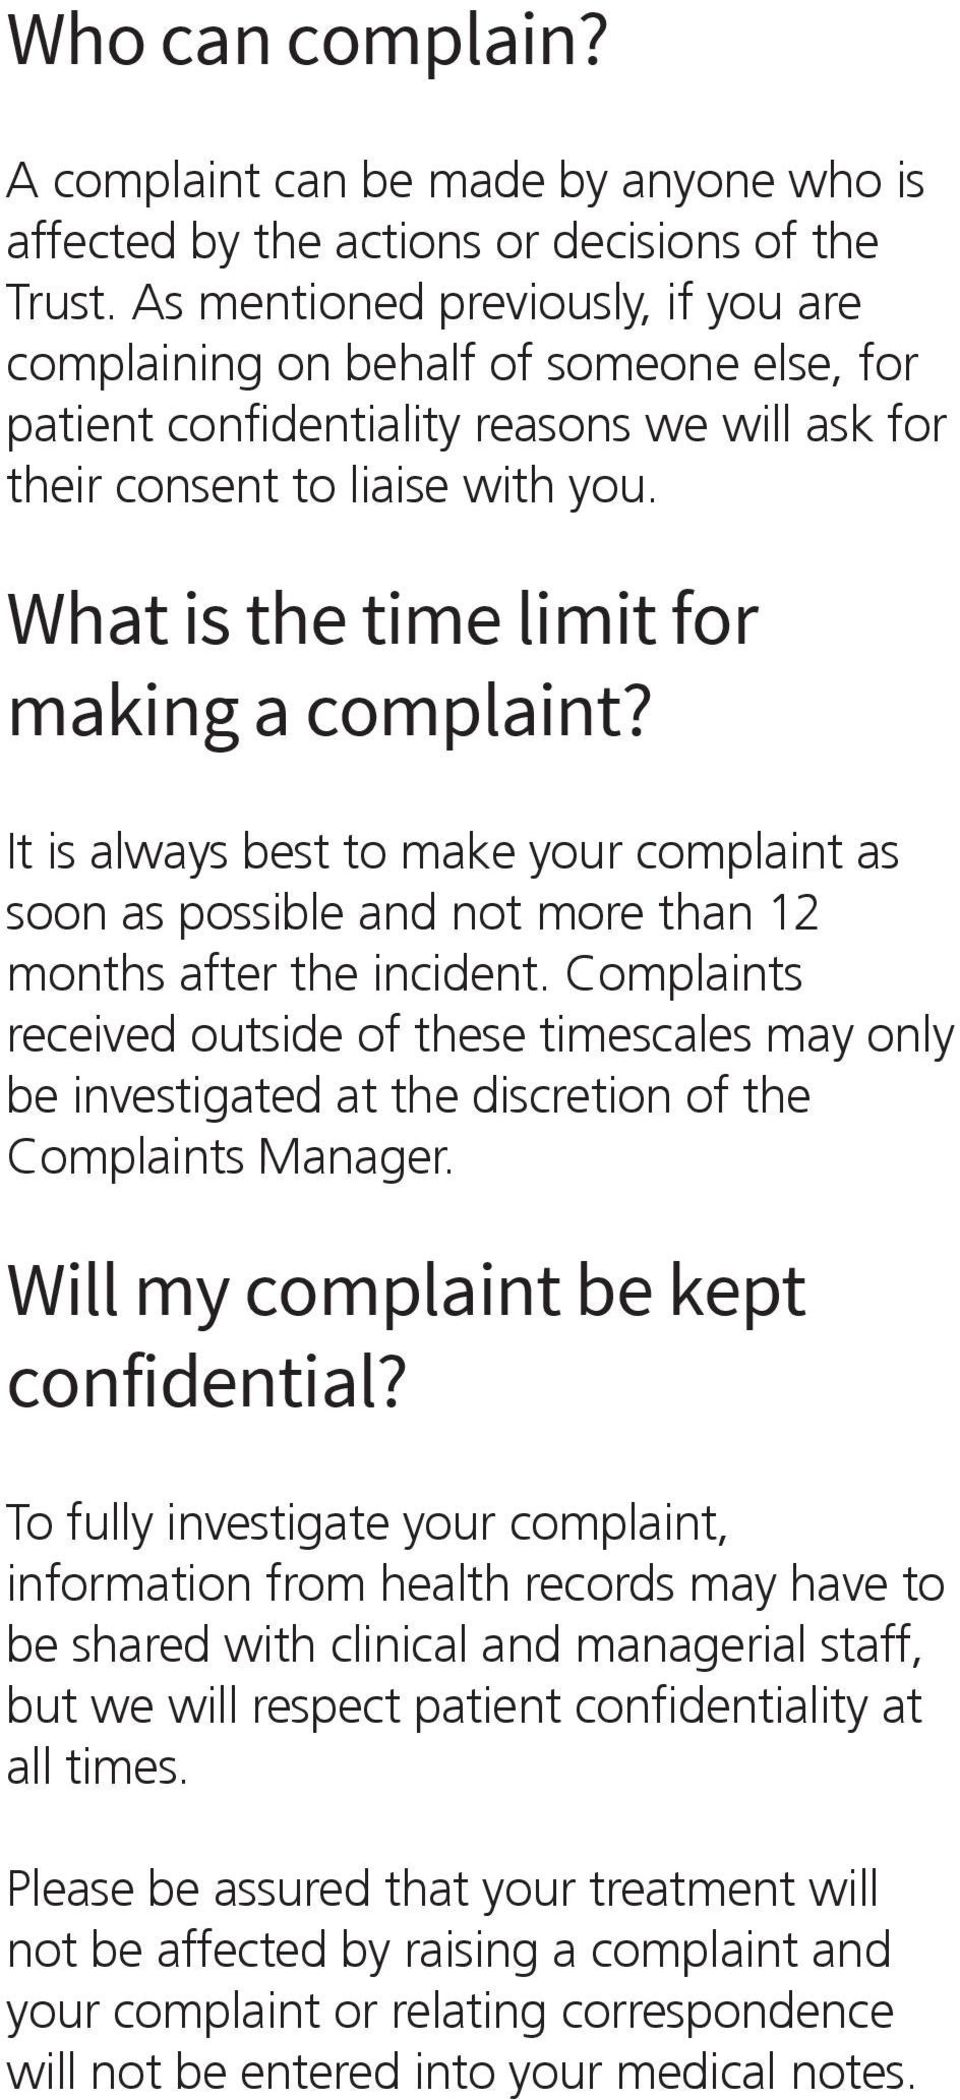 What is the time limit for making a complaint? It is always best to make your complaint as soon as possible and not more than 12 months after the incident.